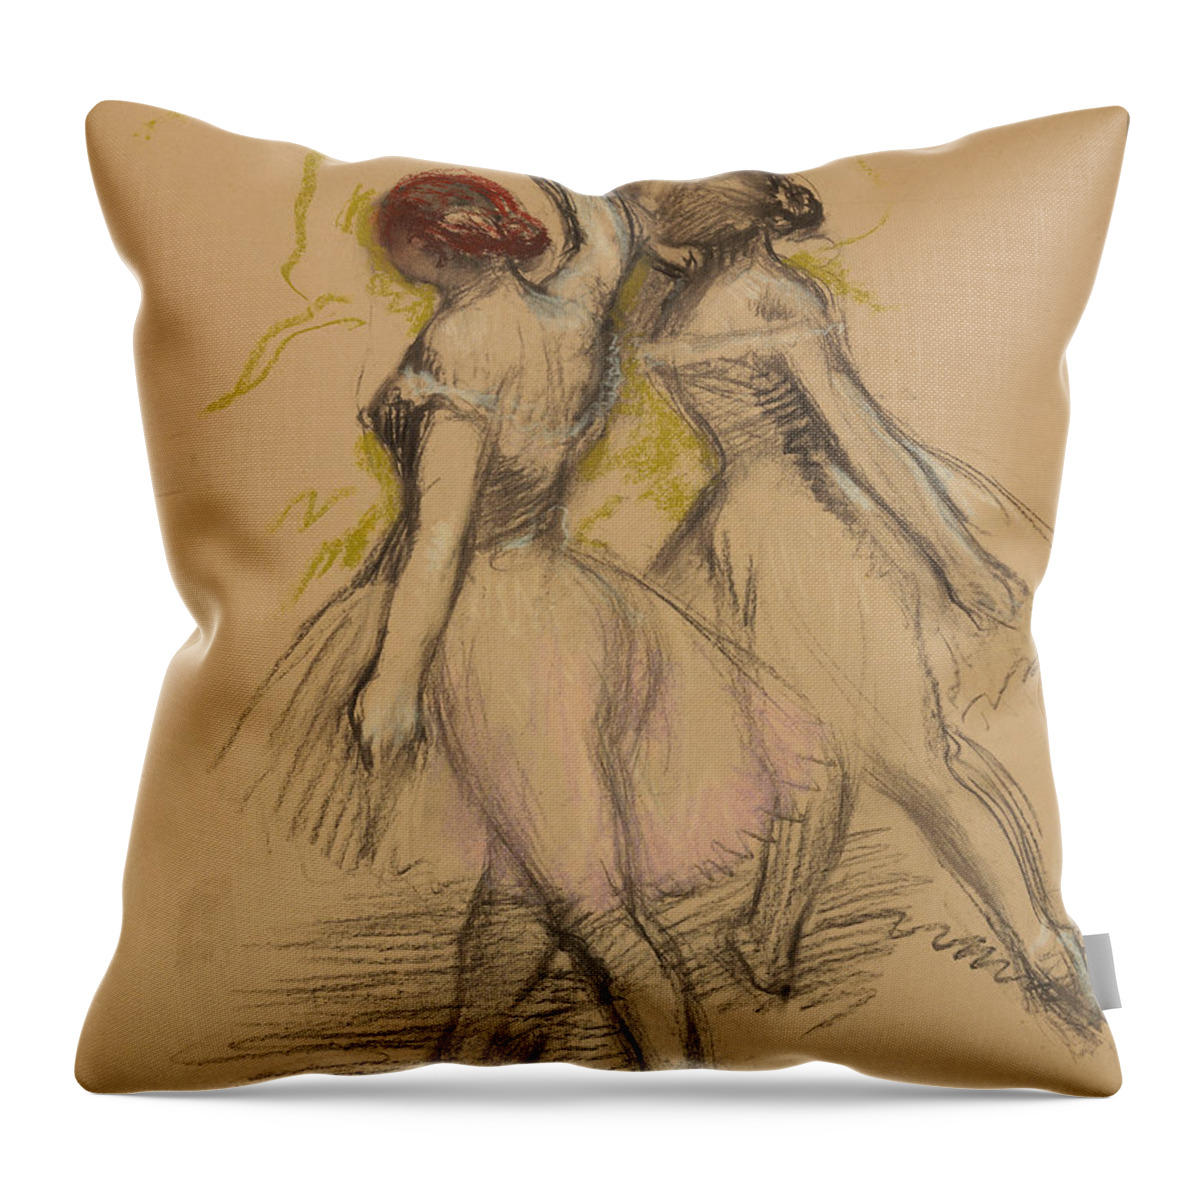 Degas Throw Pillow featuring the drawing Two Dancers by Edgar Degas